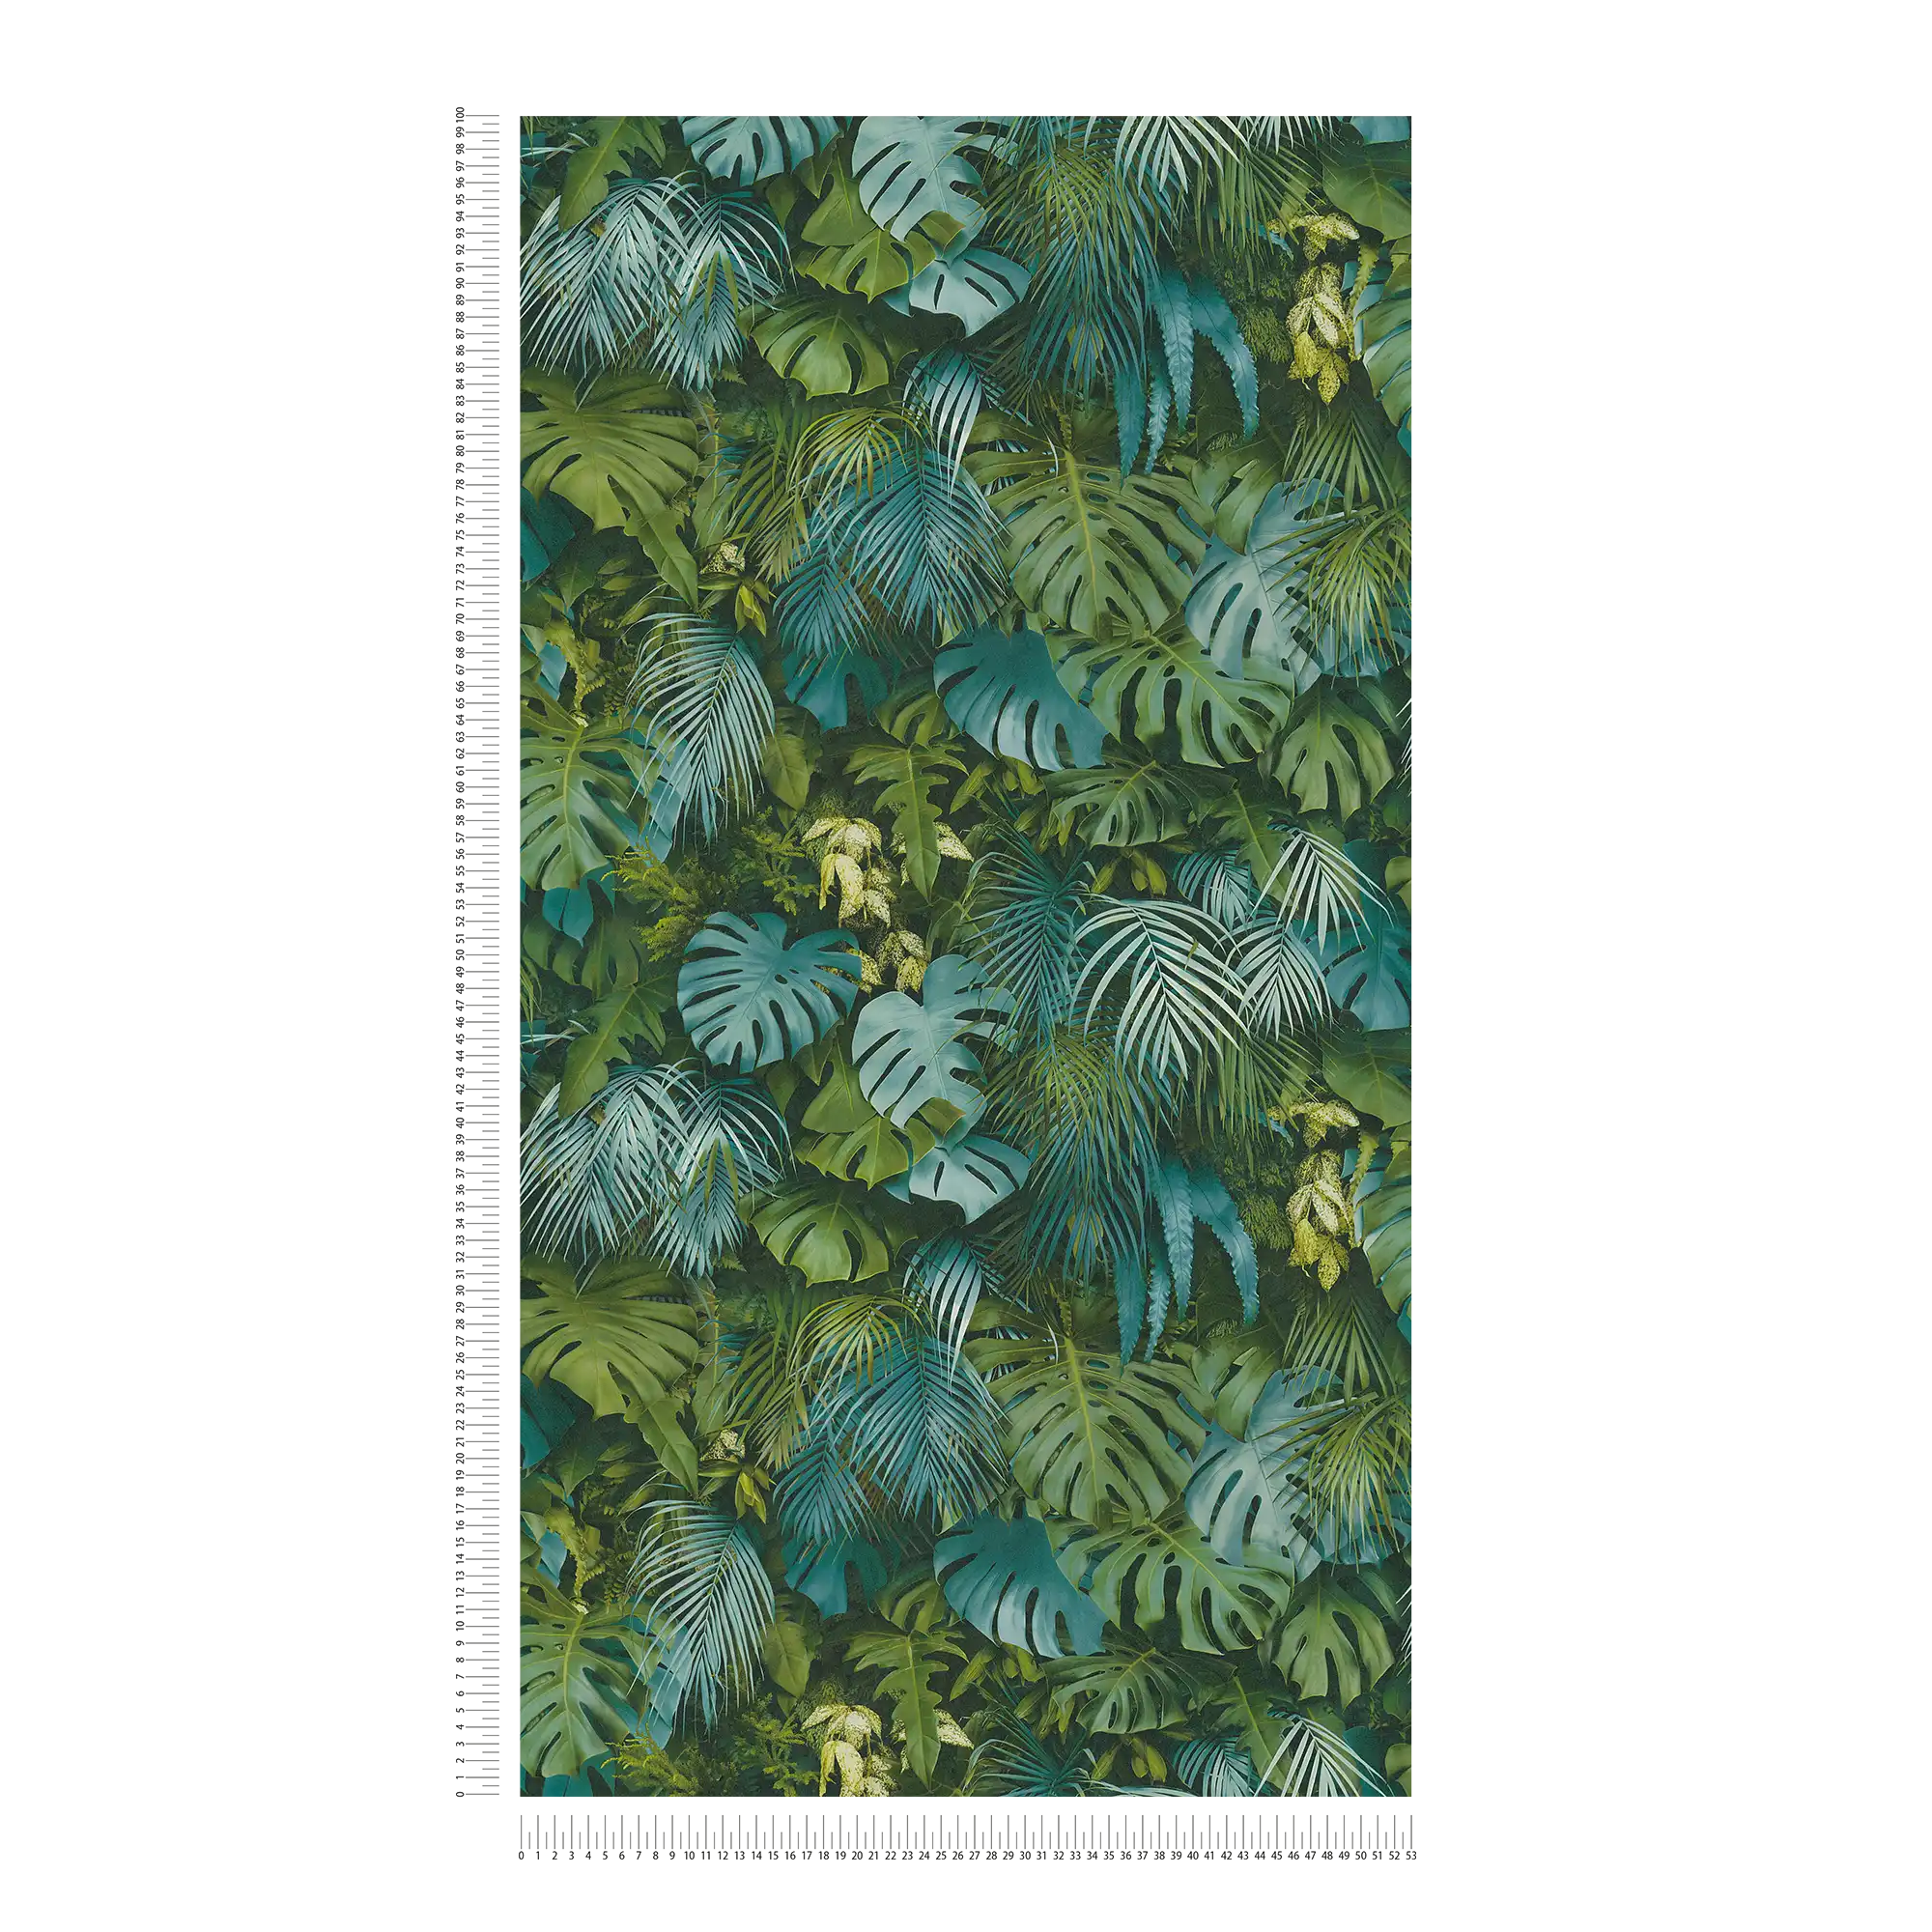             Wallpaper green forest of leaves, realistic, colour accents - green, blue
        